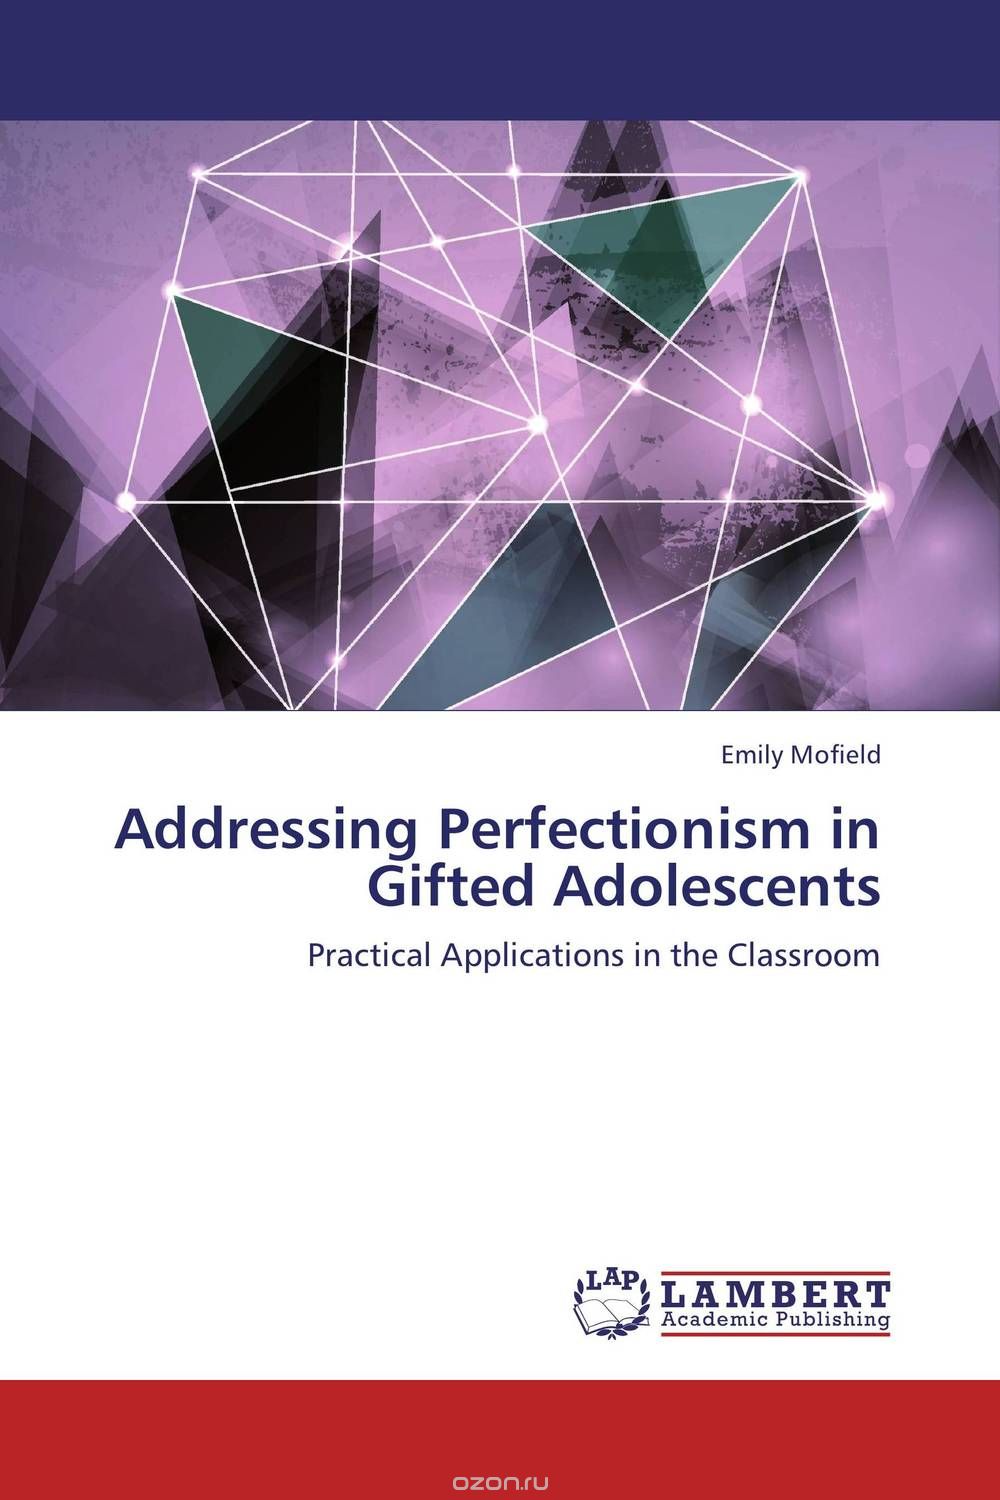 Addressing Perfectionism in Gifted Adolescents